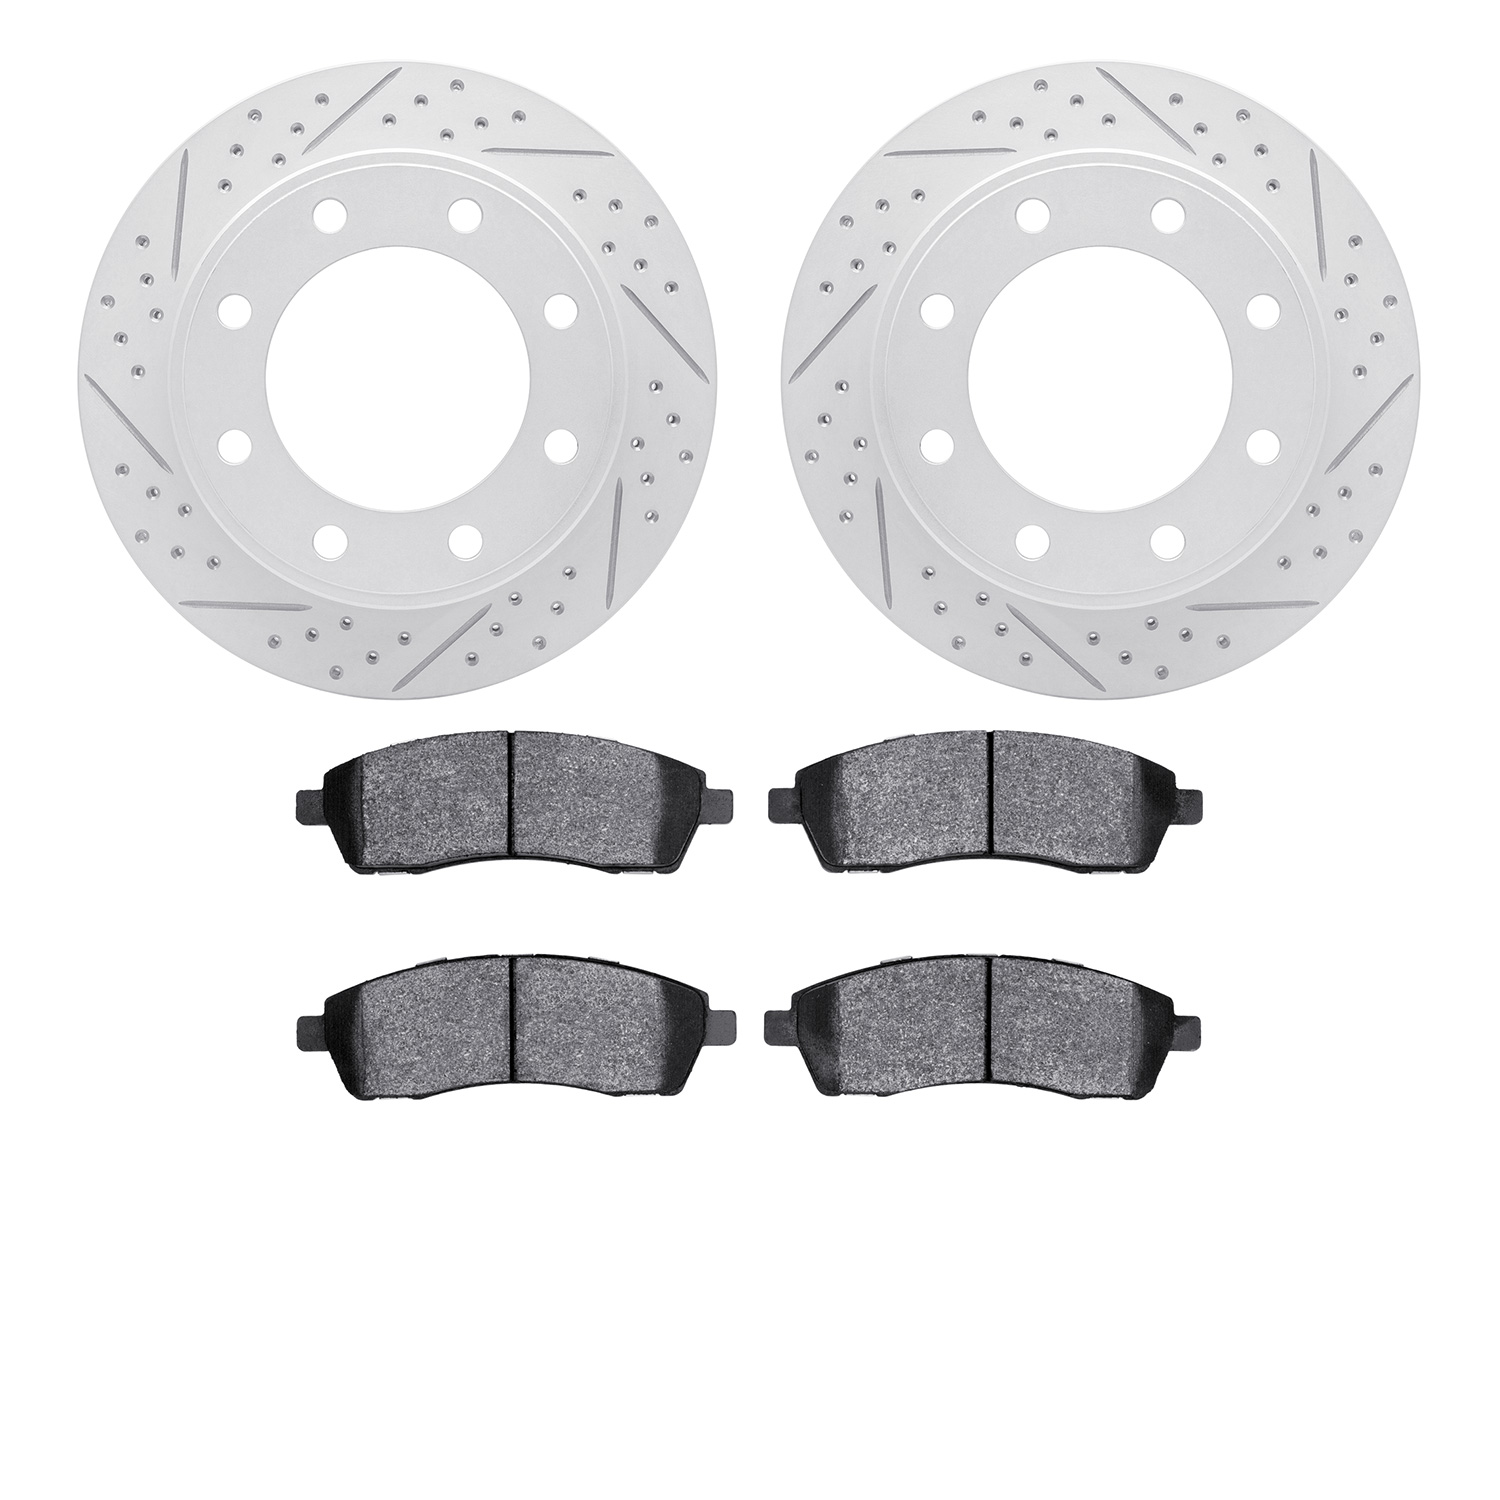 2202-99104 Geoperformance Drilled/Slotted Rotors w/Heavy-Duty Pads Kit, 1999-2005 Ford/Lincoln/Mercury/Mazda, Position: Rear